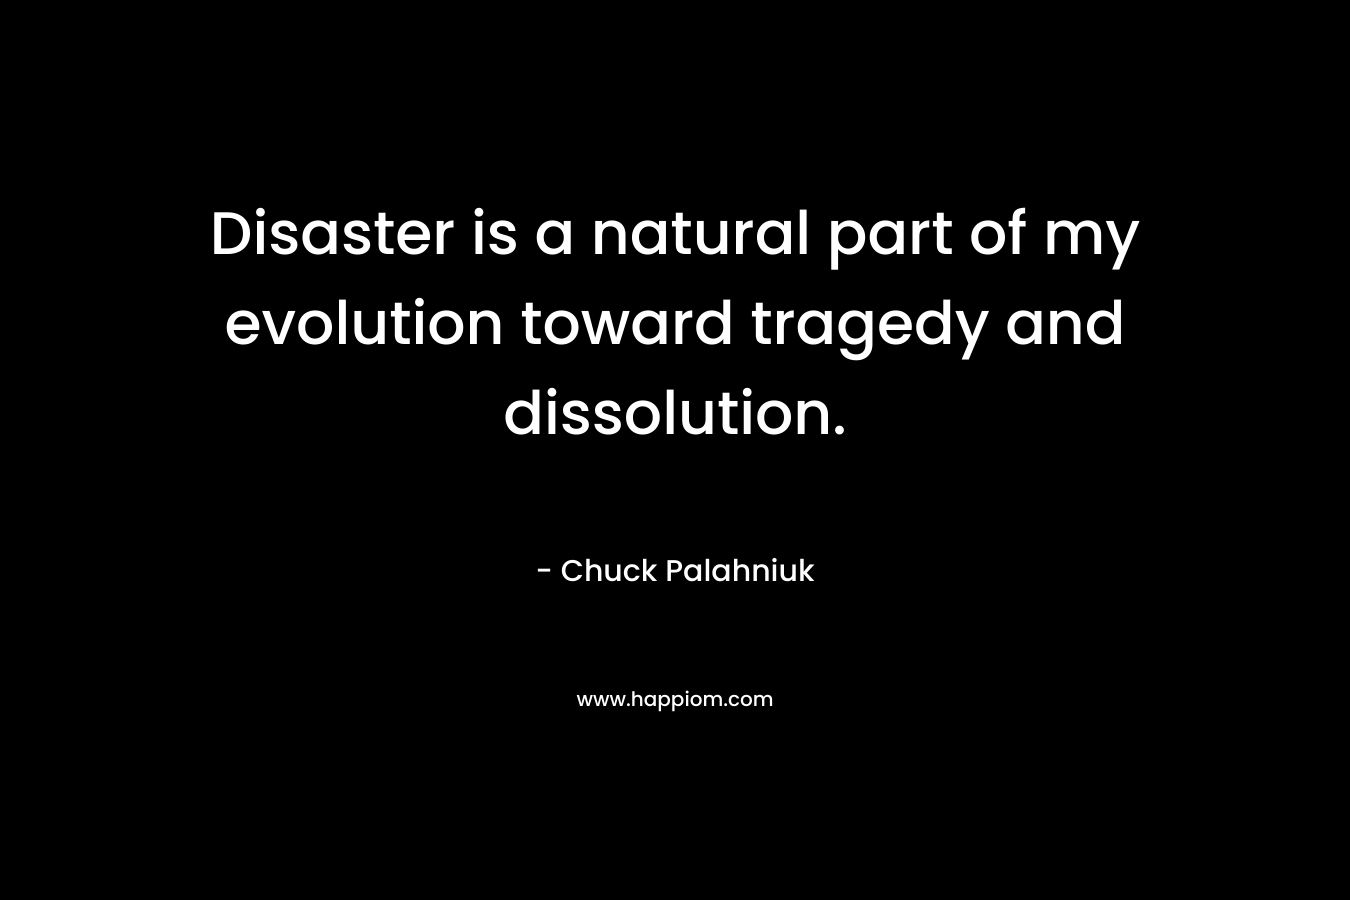 Disaster is a natural part of my evolution toward tragedy and dissolution.